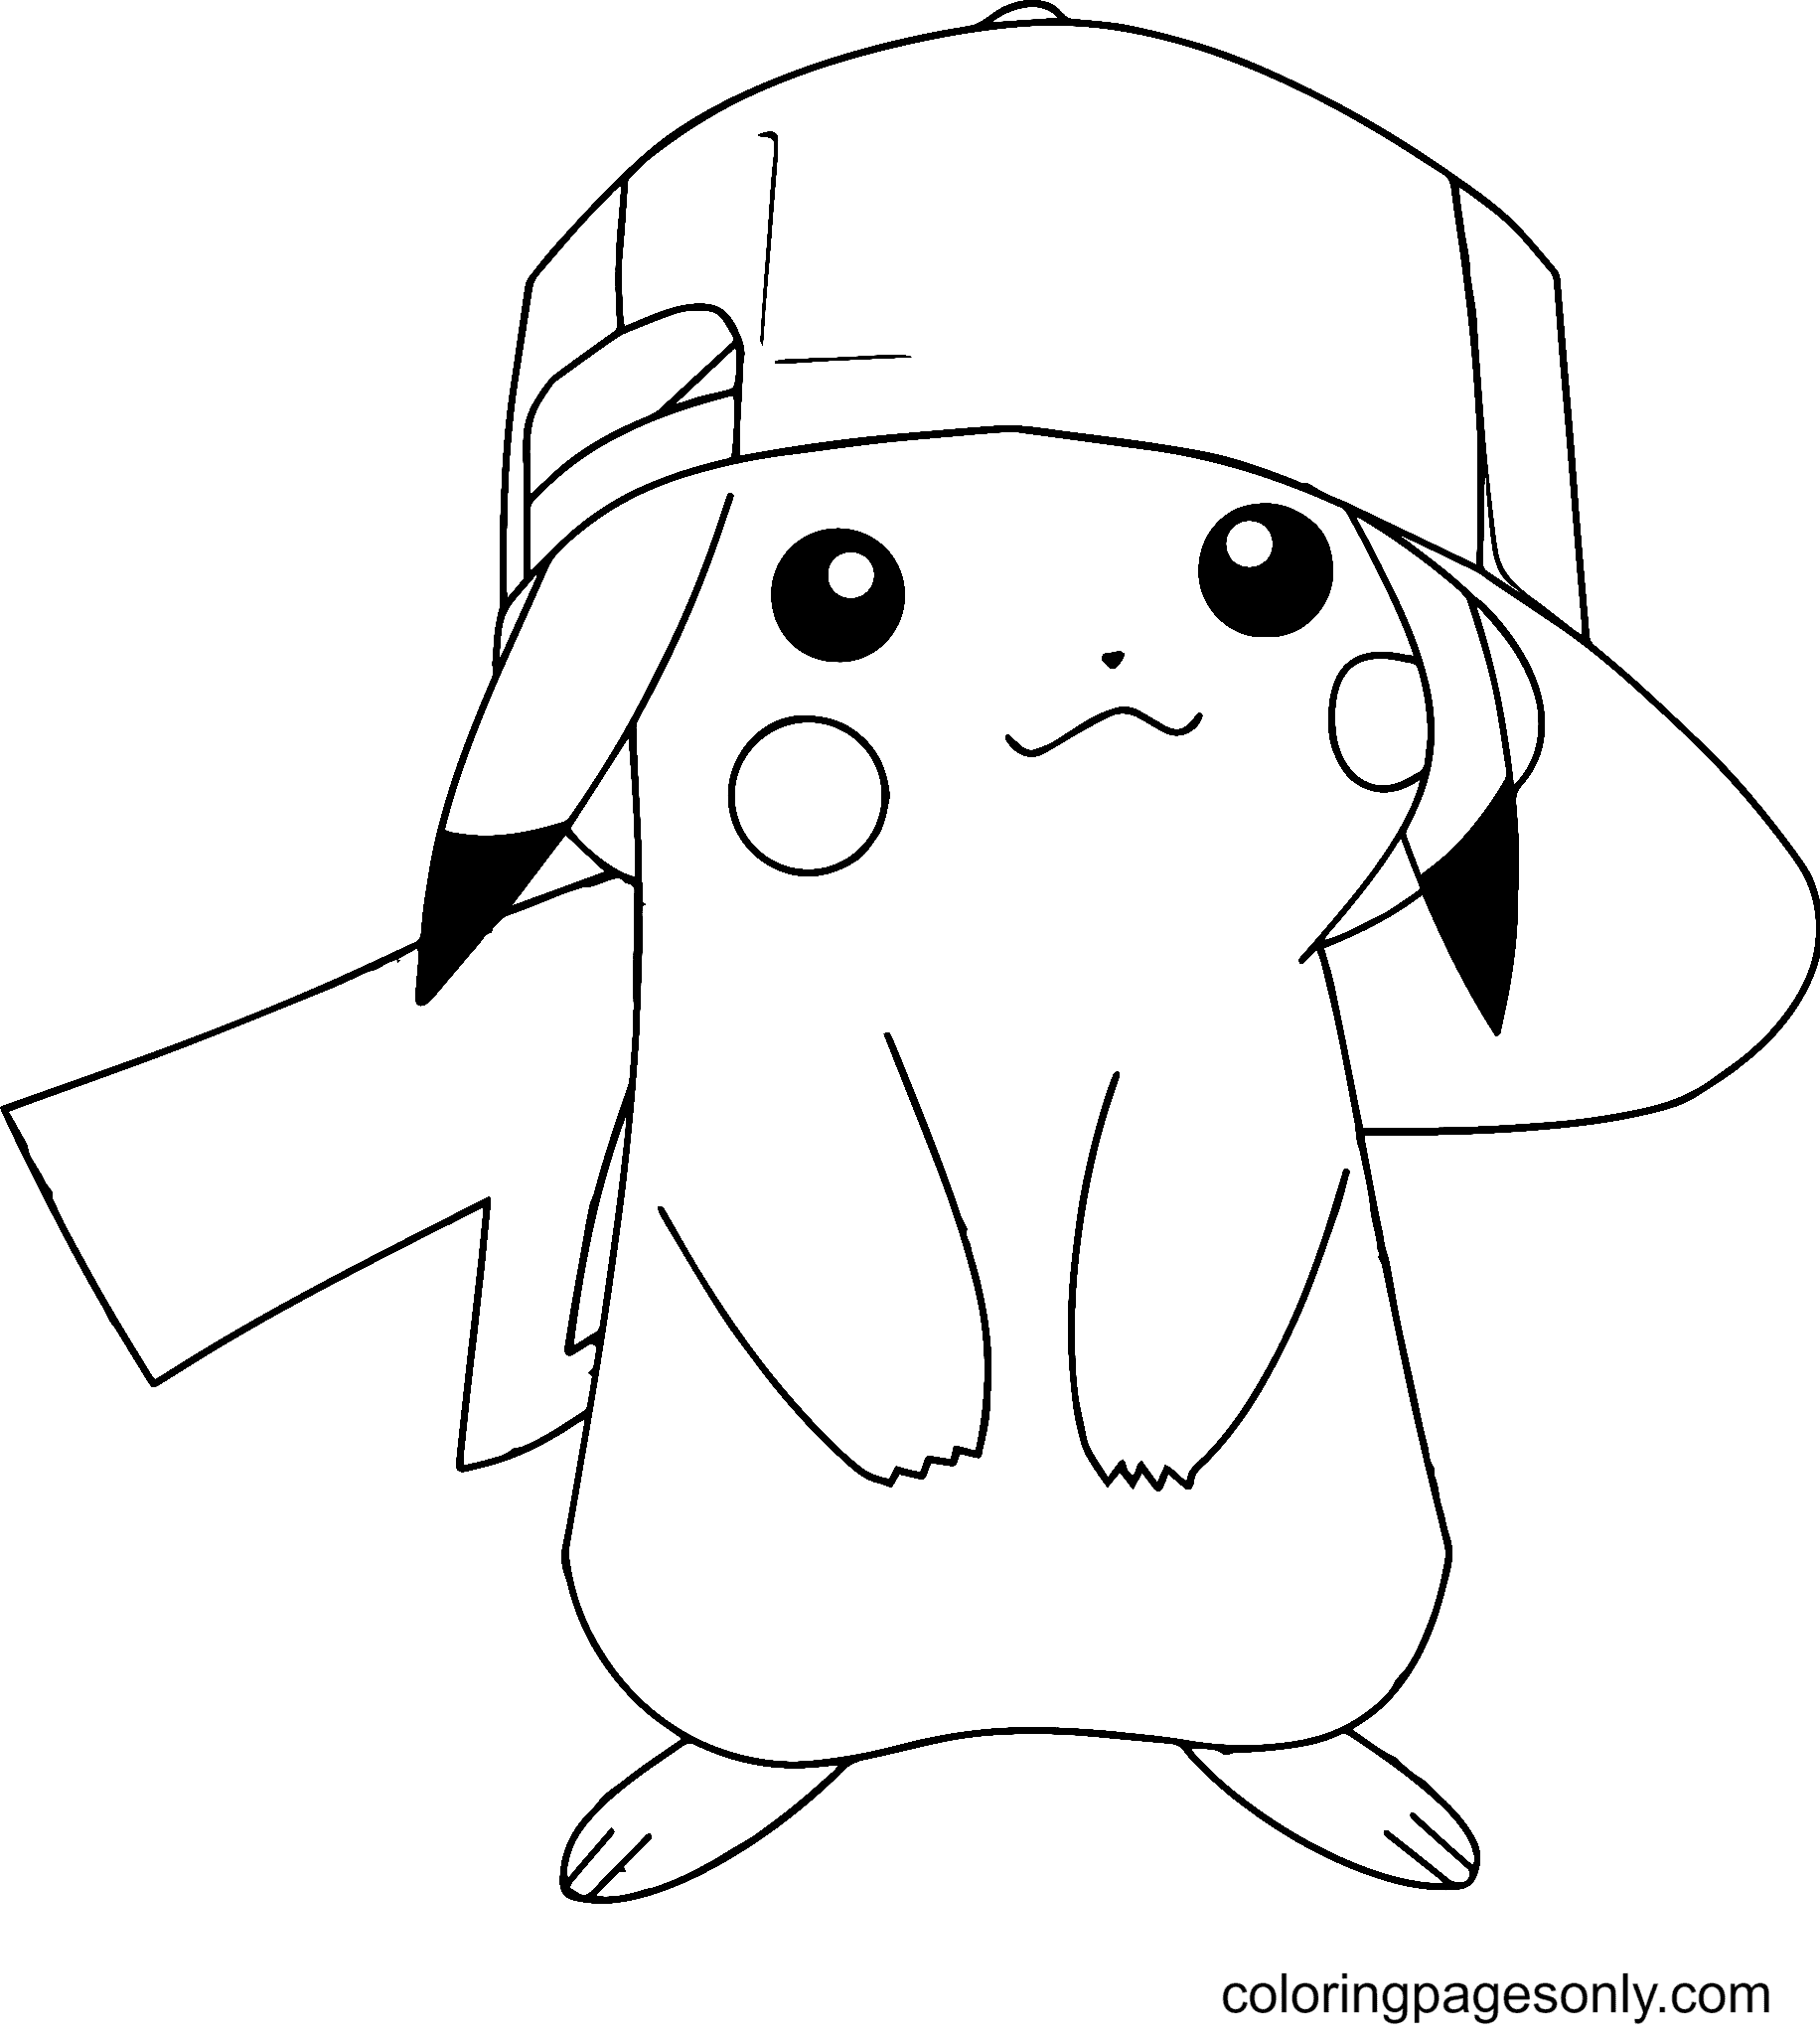 Pikachu Wearing A Hat Coloring Pages